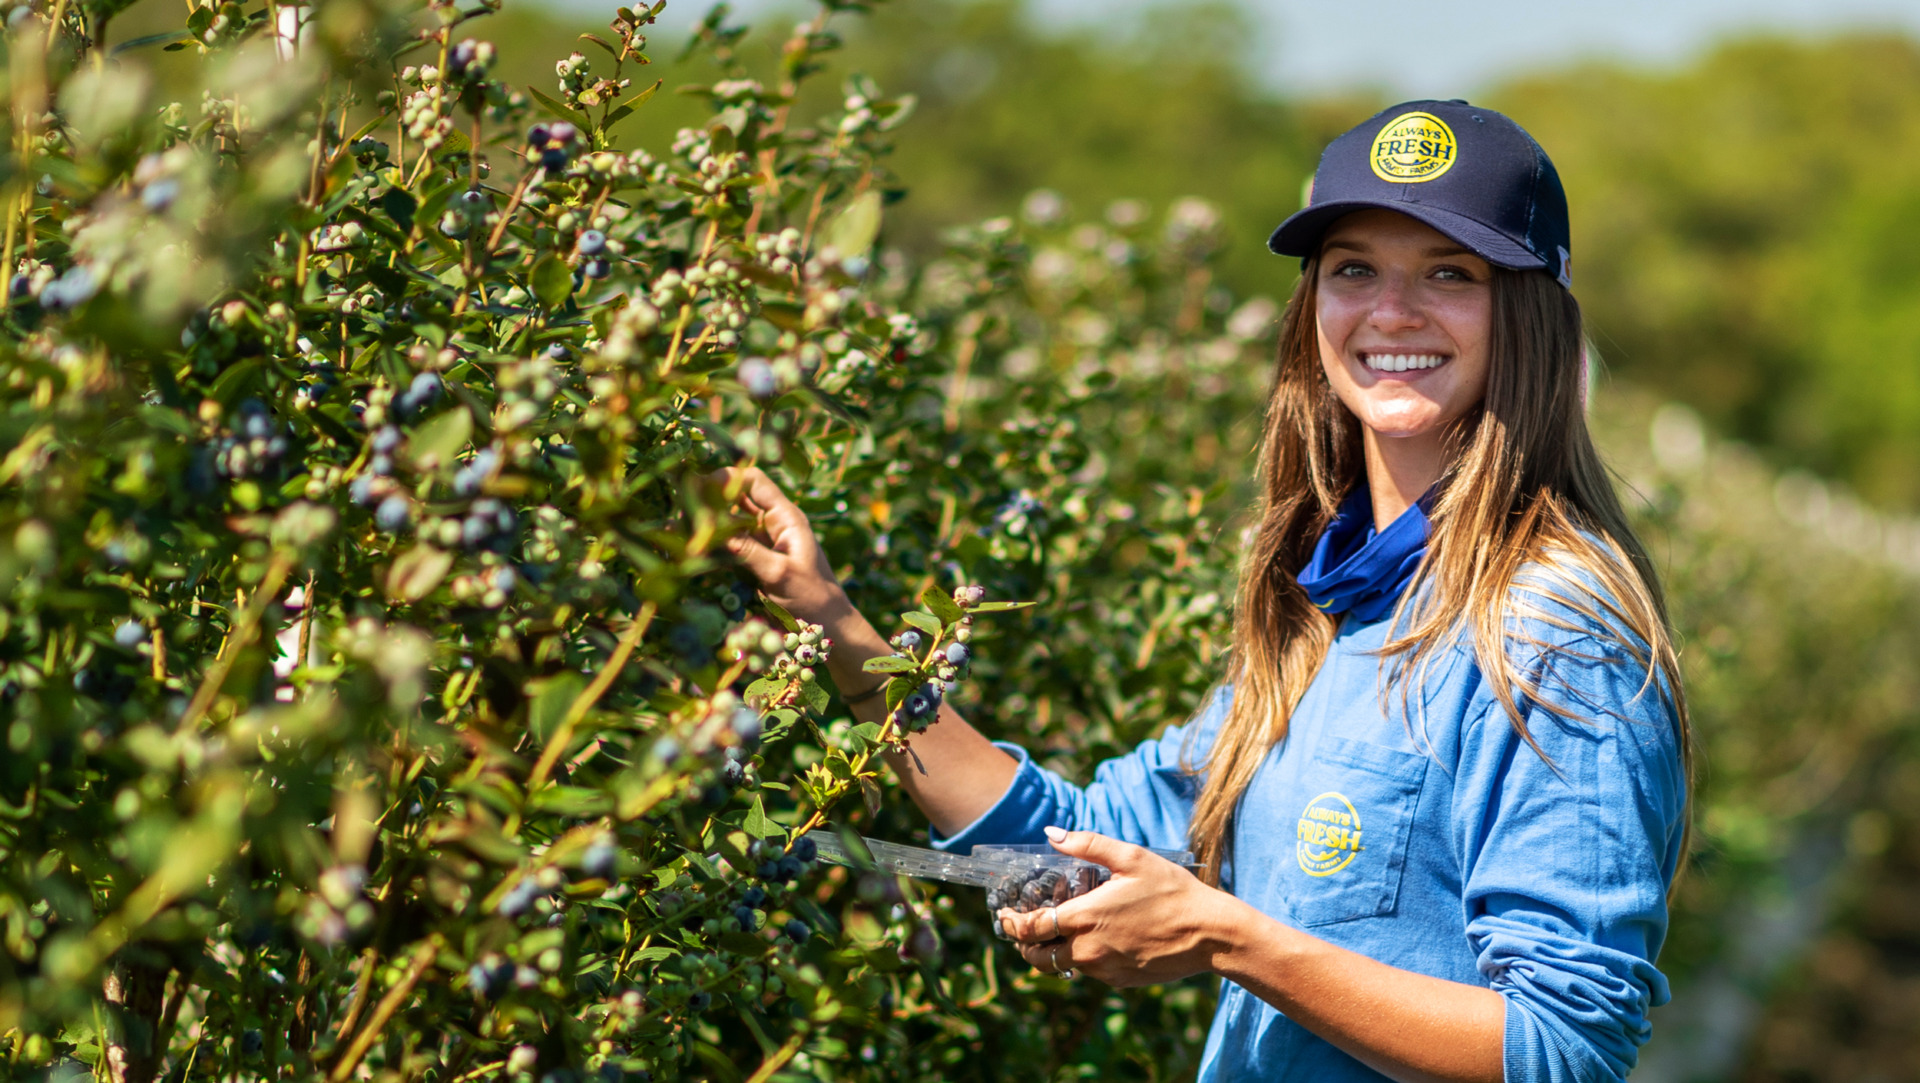 Image of Always Fresh worker next to a blueberry bush